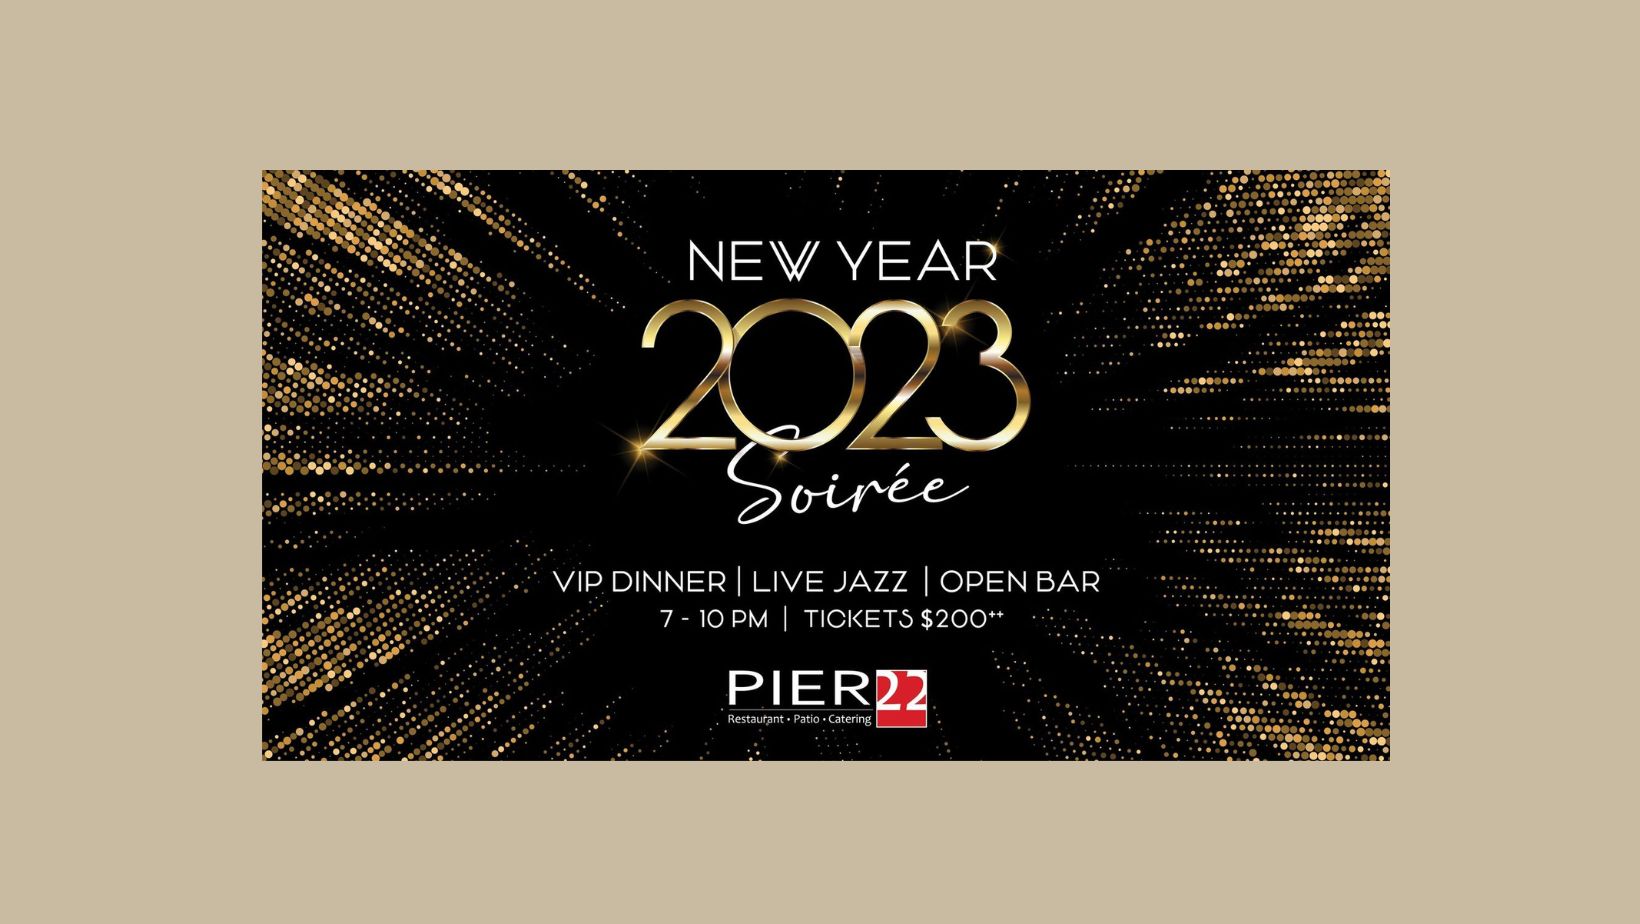 New Year Soiree